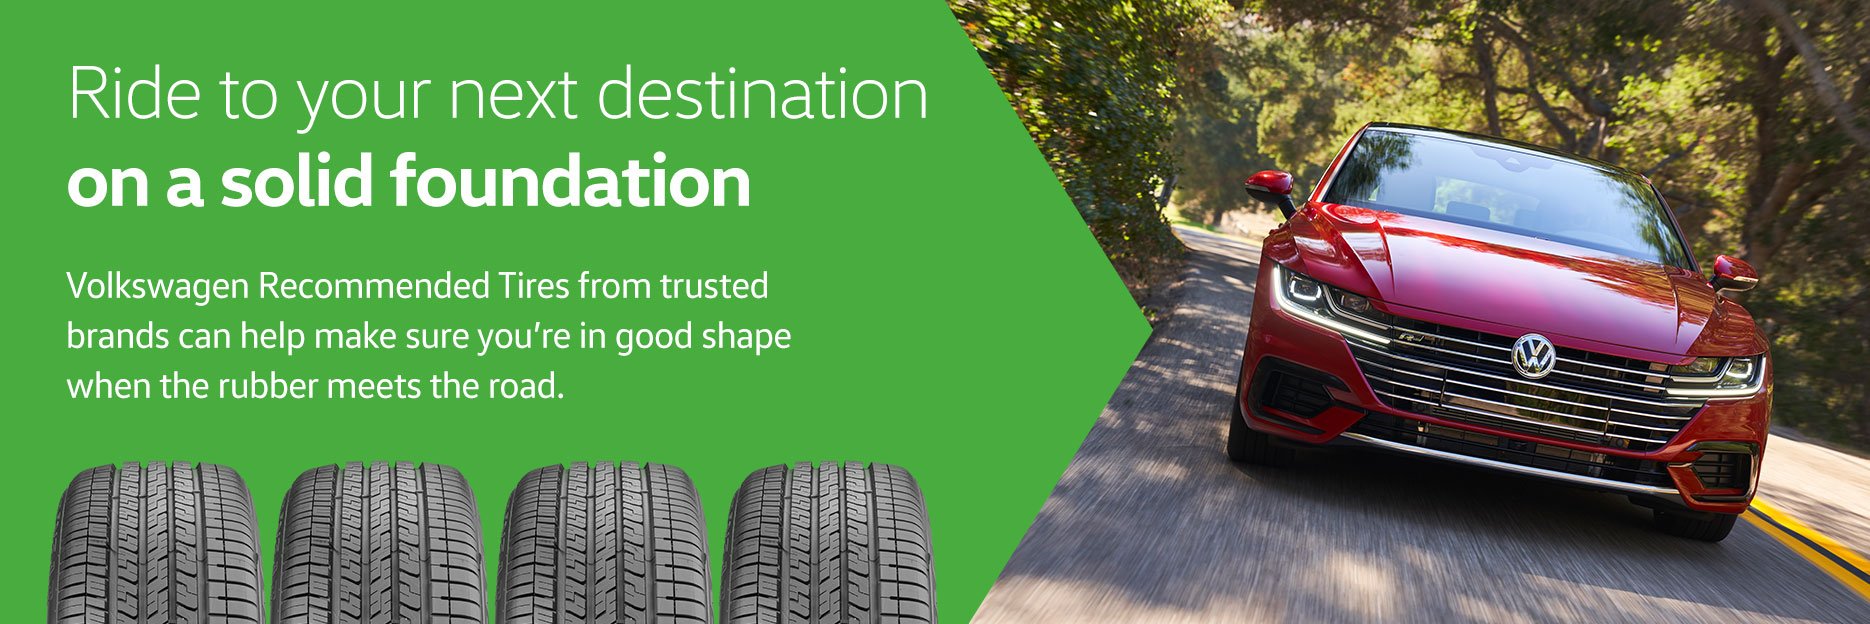 Ride to your next destination on a solid foundation Volkswagen Recommended Tires from trusted brands can help make sure you're in good shape when the rubber meets the road.